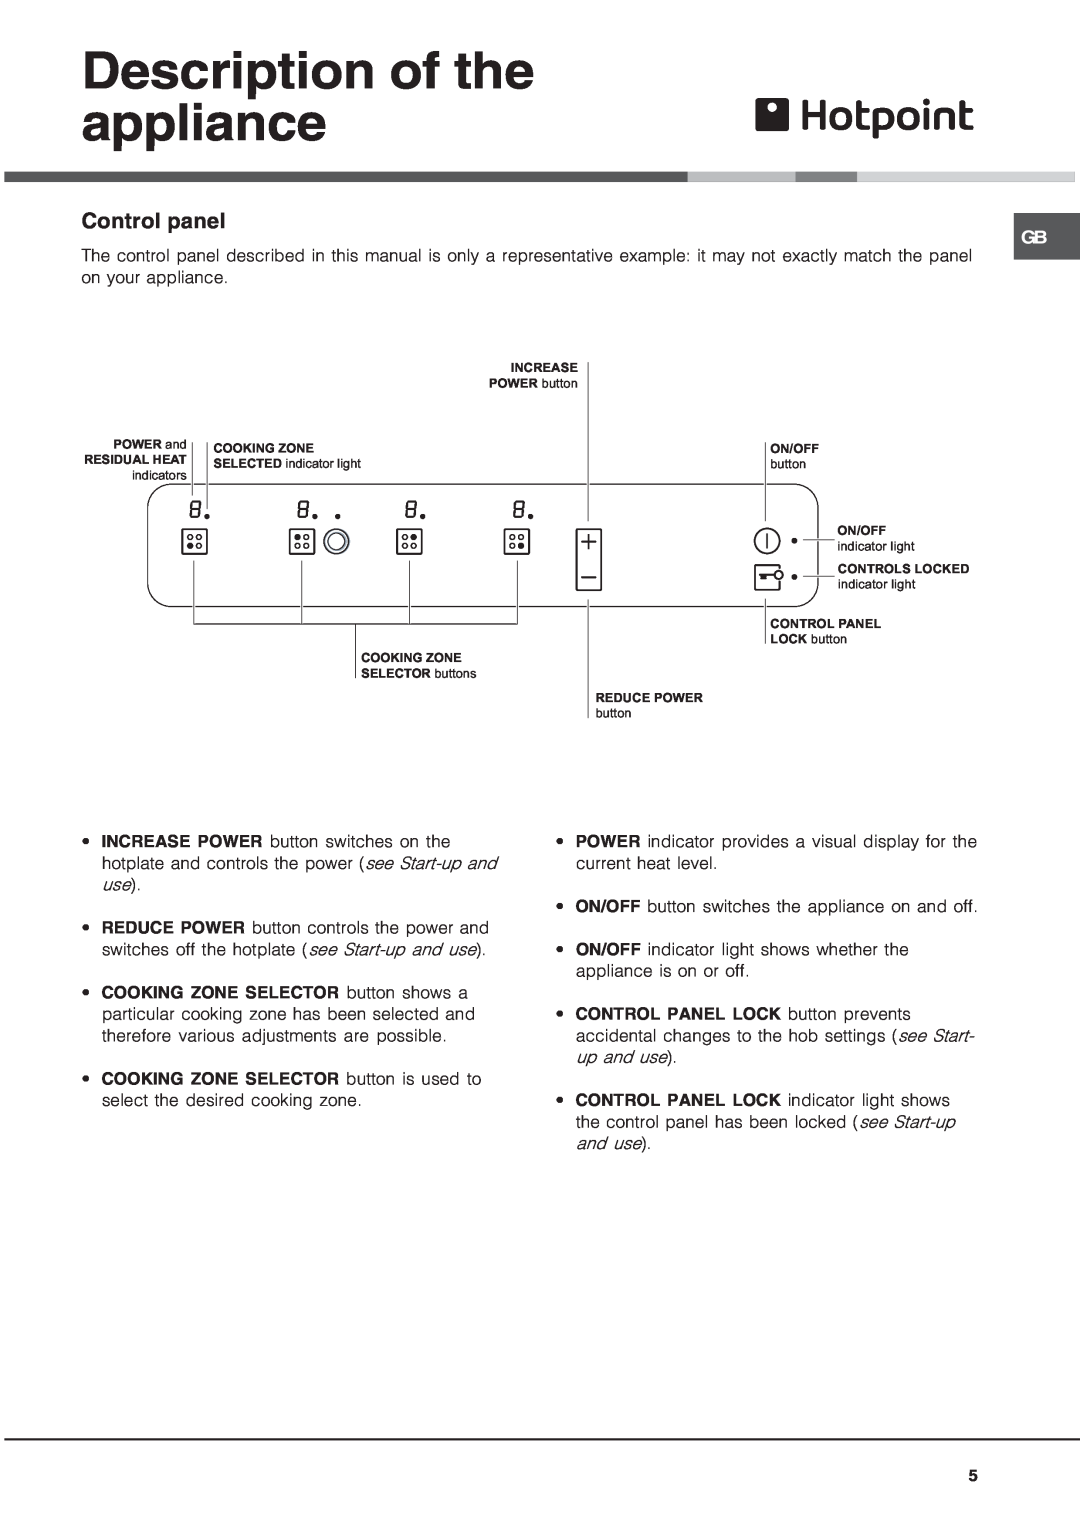 Hotpoint CRA 641 DC operating instructions Description of the appliance, Control panel 